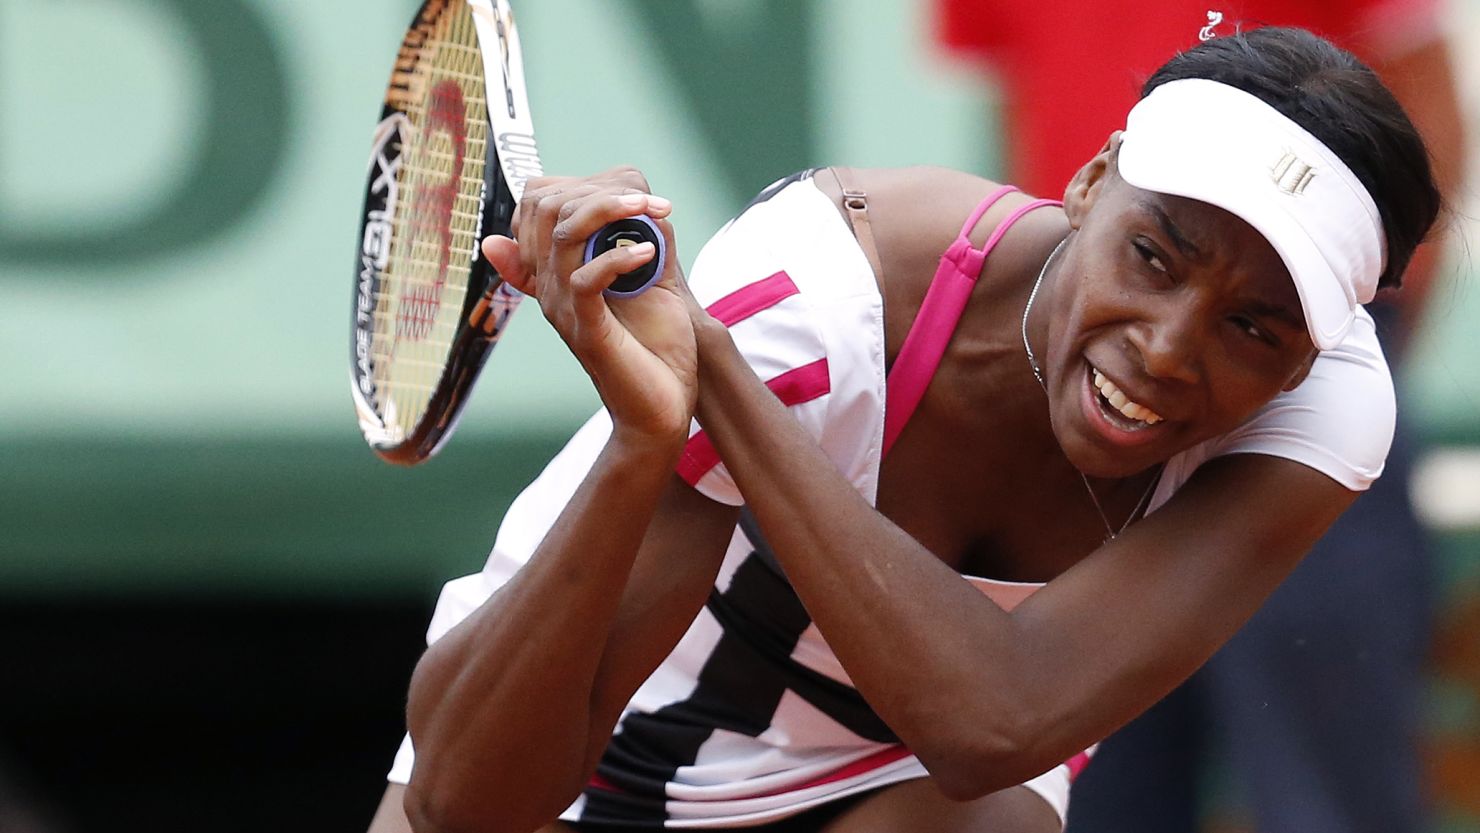 Venus Williams followed her sister Serena out of the French Open tournament on Wednesday